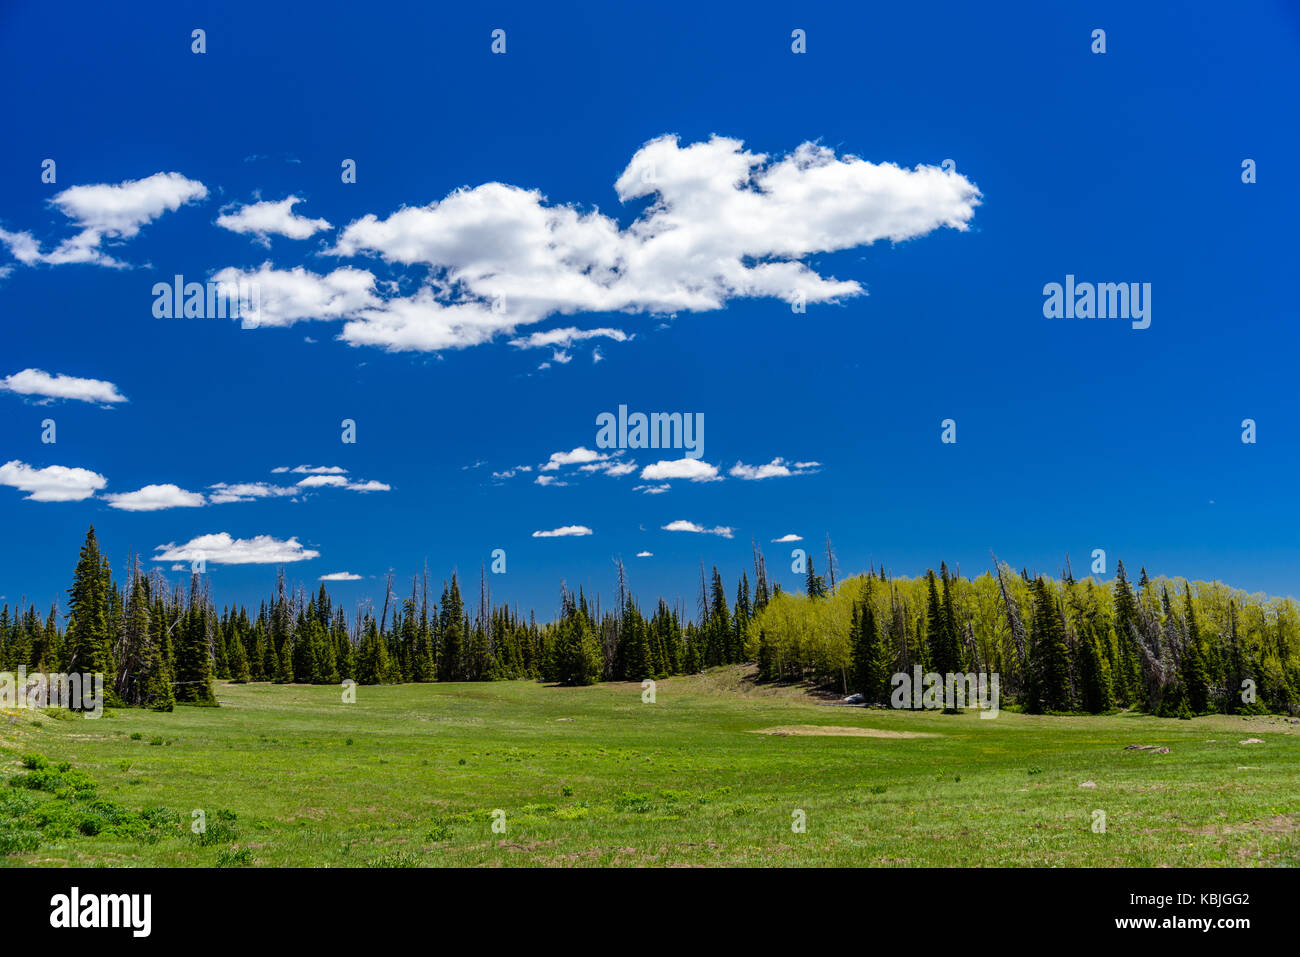 The High Country with green meadows, grass, trees and fresh air. Stock Photo